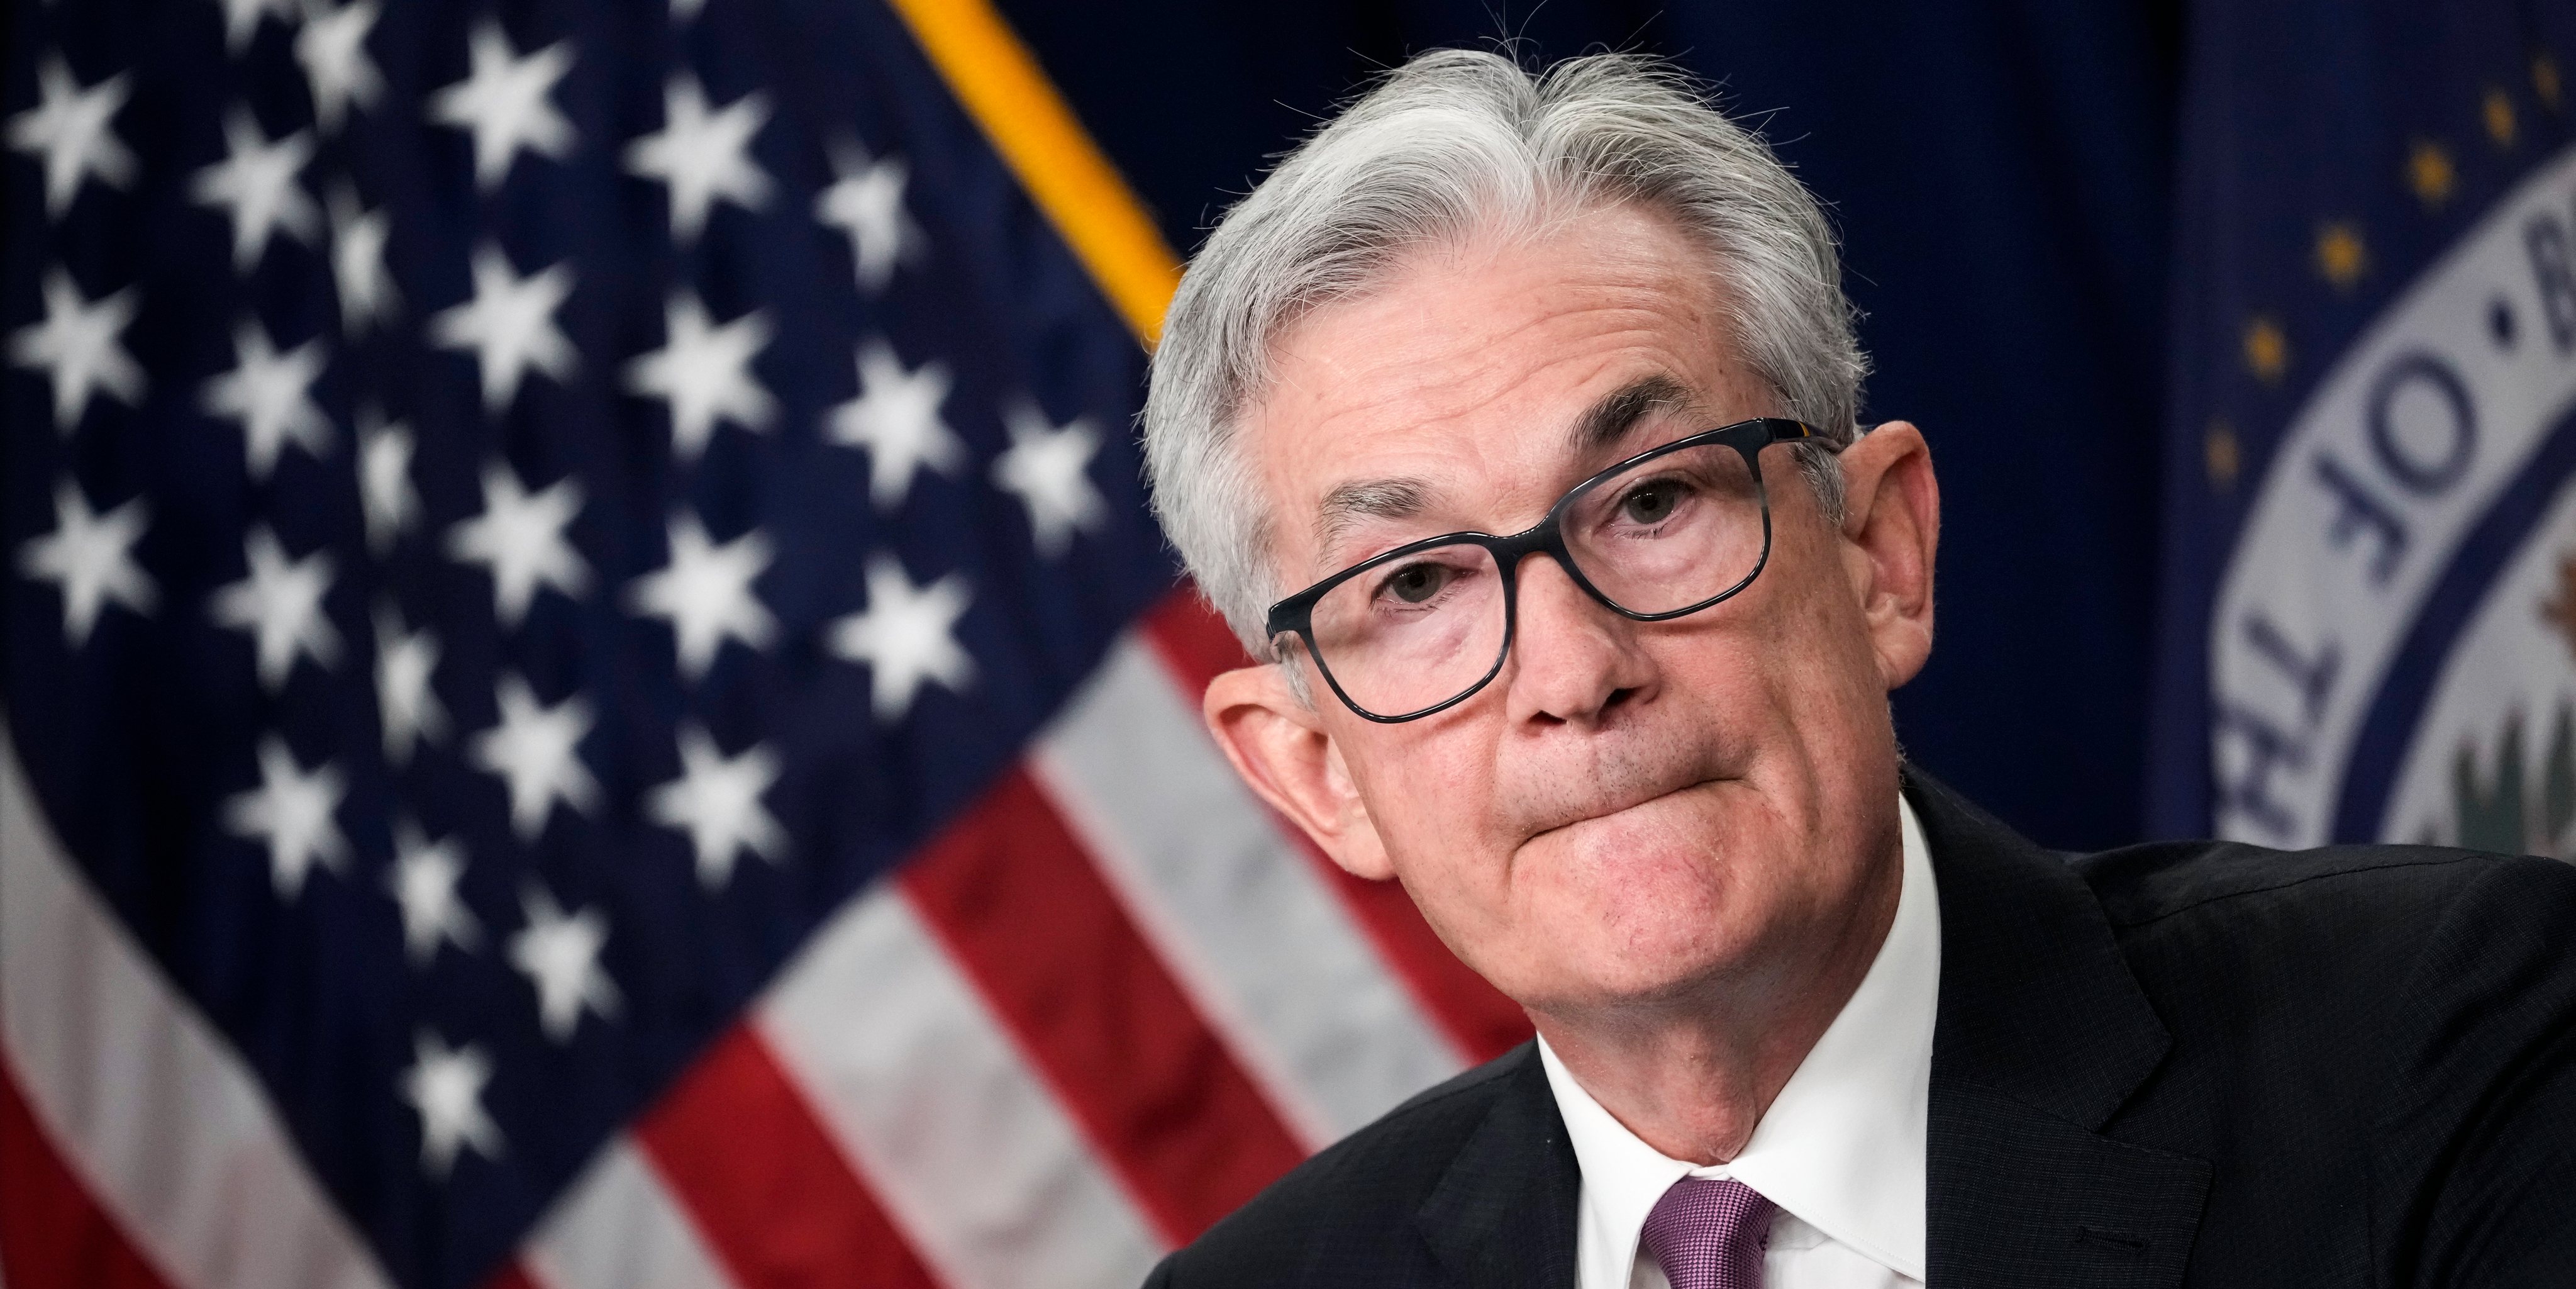 Federal Reserve Chair Jerome Powell Holds News Conference Following Federal Open Market Committee Meeting